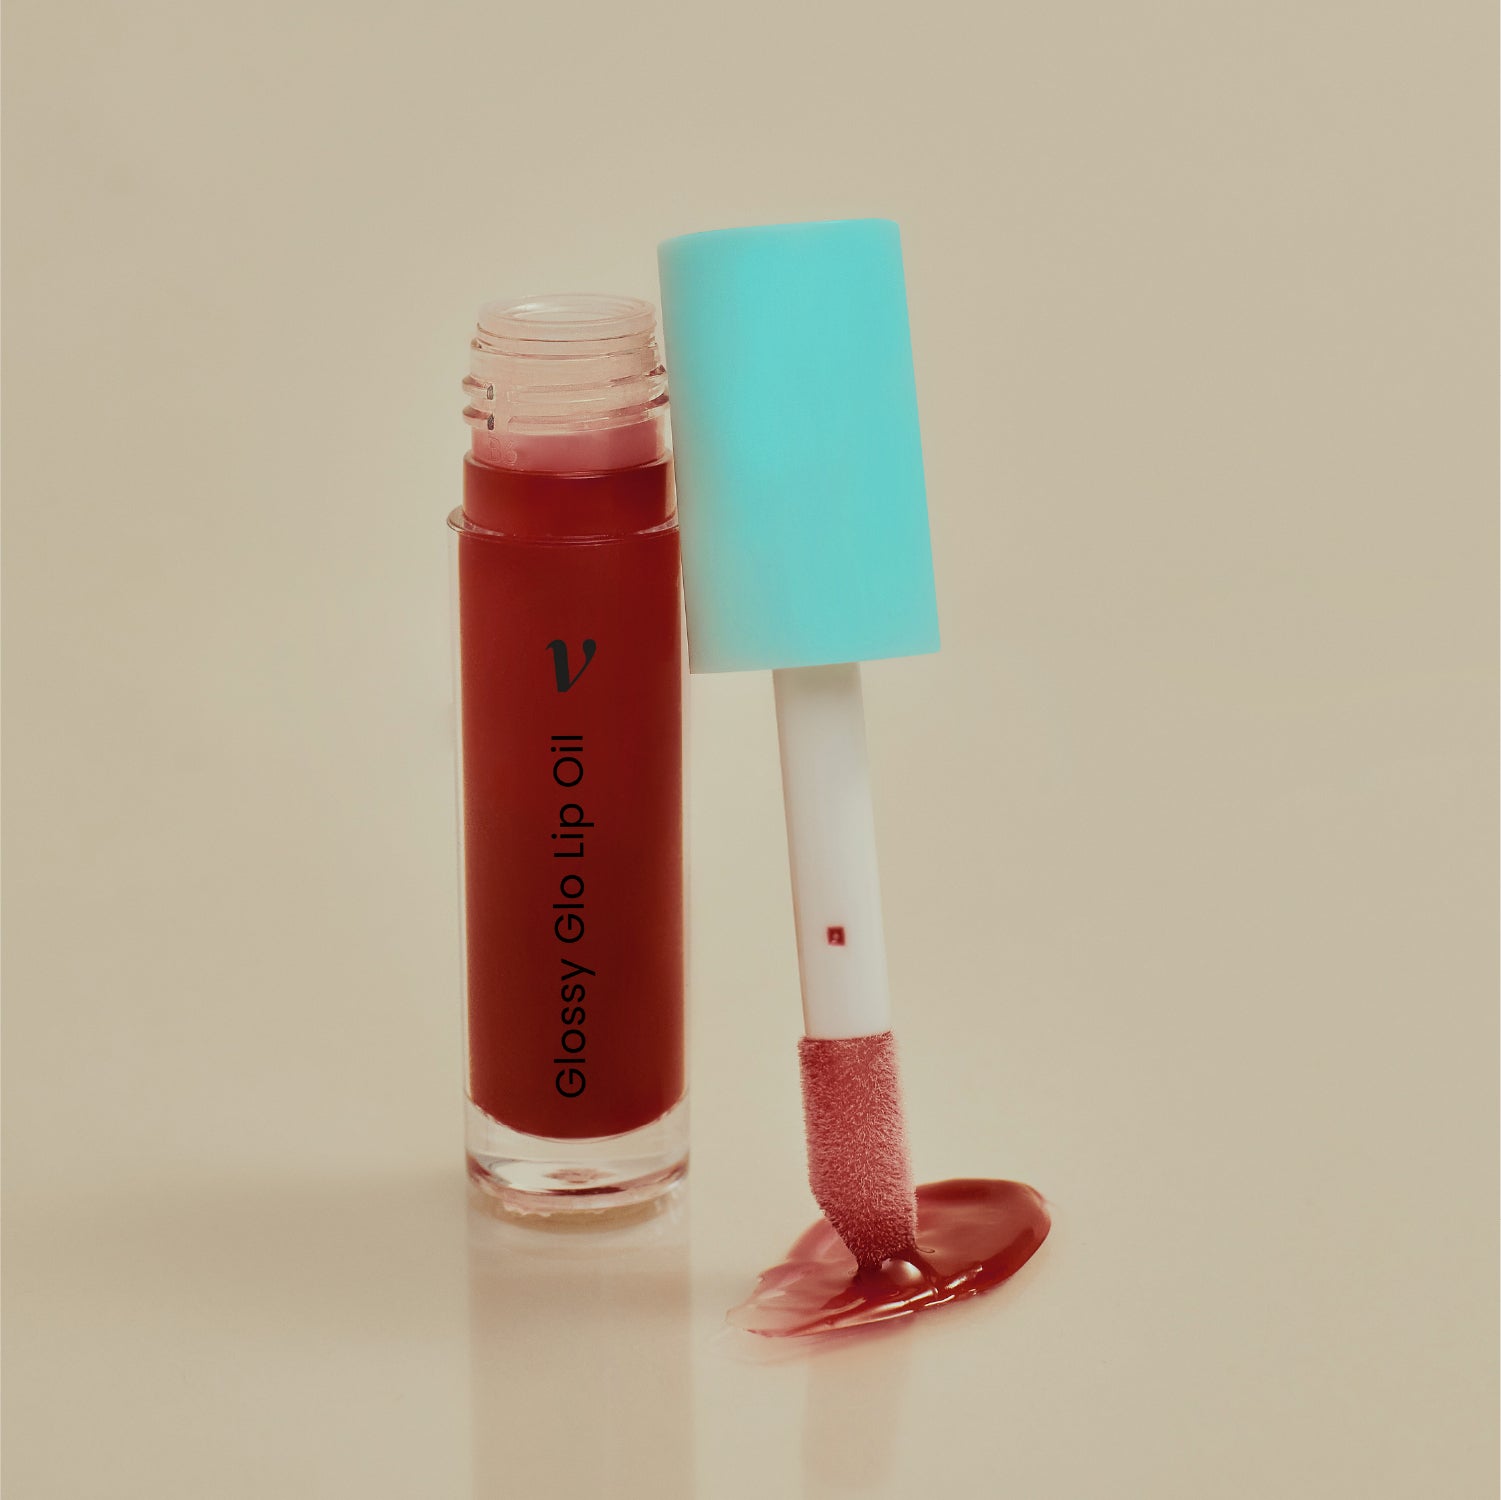 Glossy Glo Lip Oil in Crystal Clear + Cherry Jam Bundle